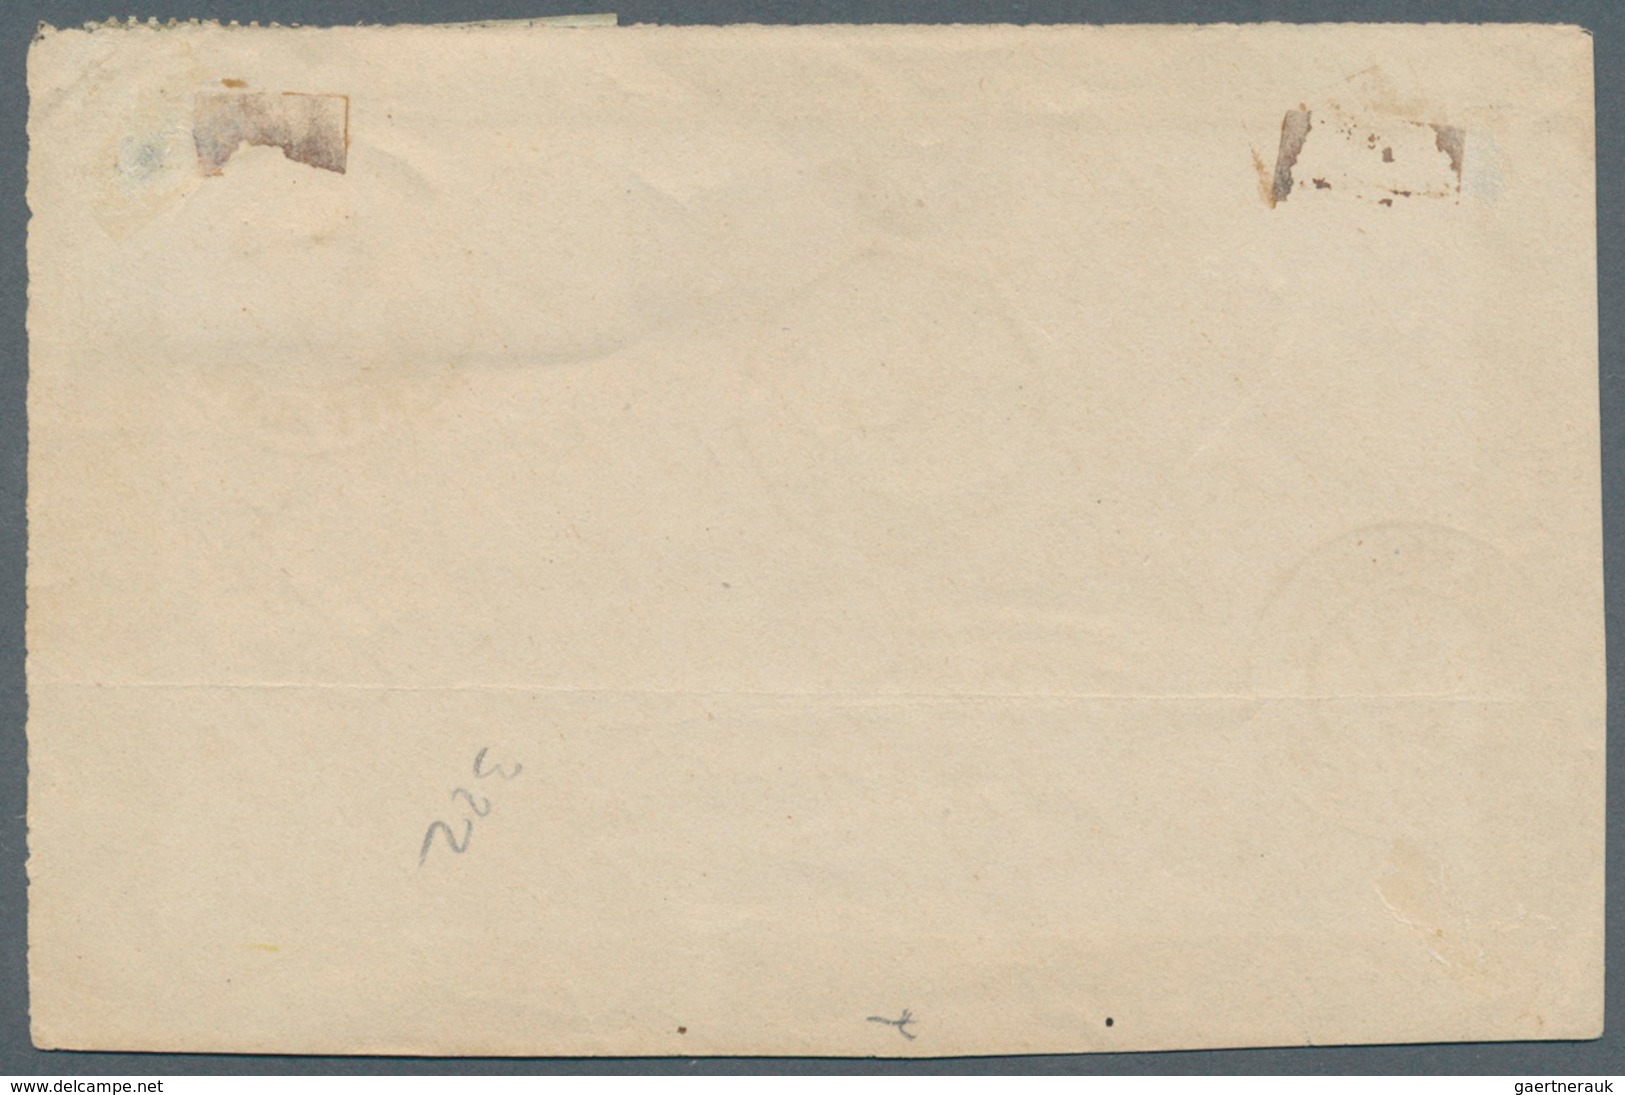 Guadeloupe: 1881. Mourning Envelope (front) Addressed To Bordeaux Bearing French General Colonies Yv - Brieven En Documenten